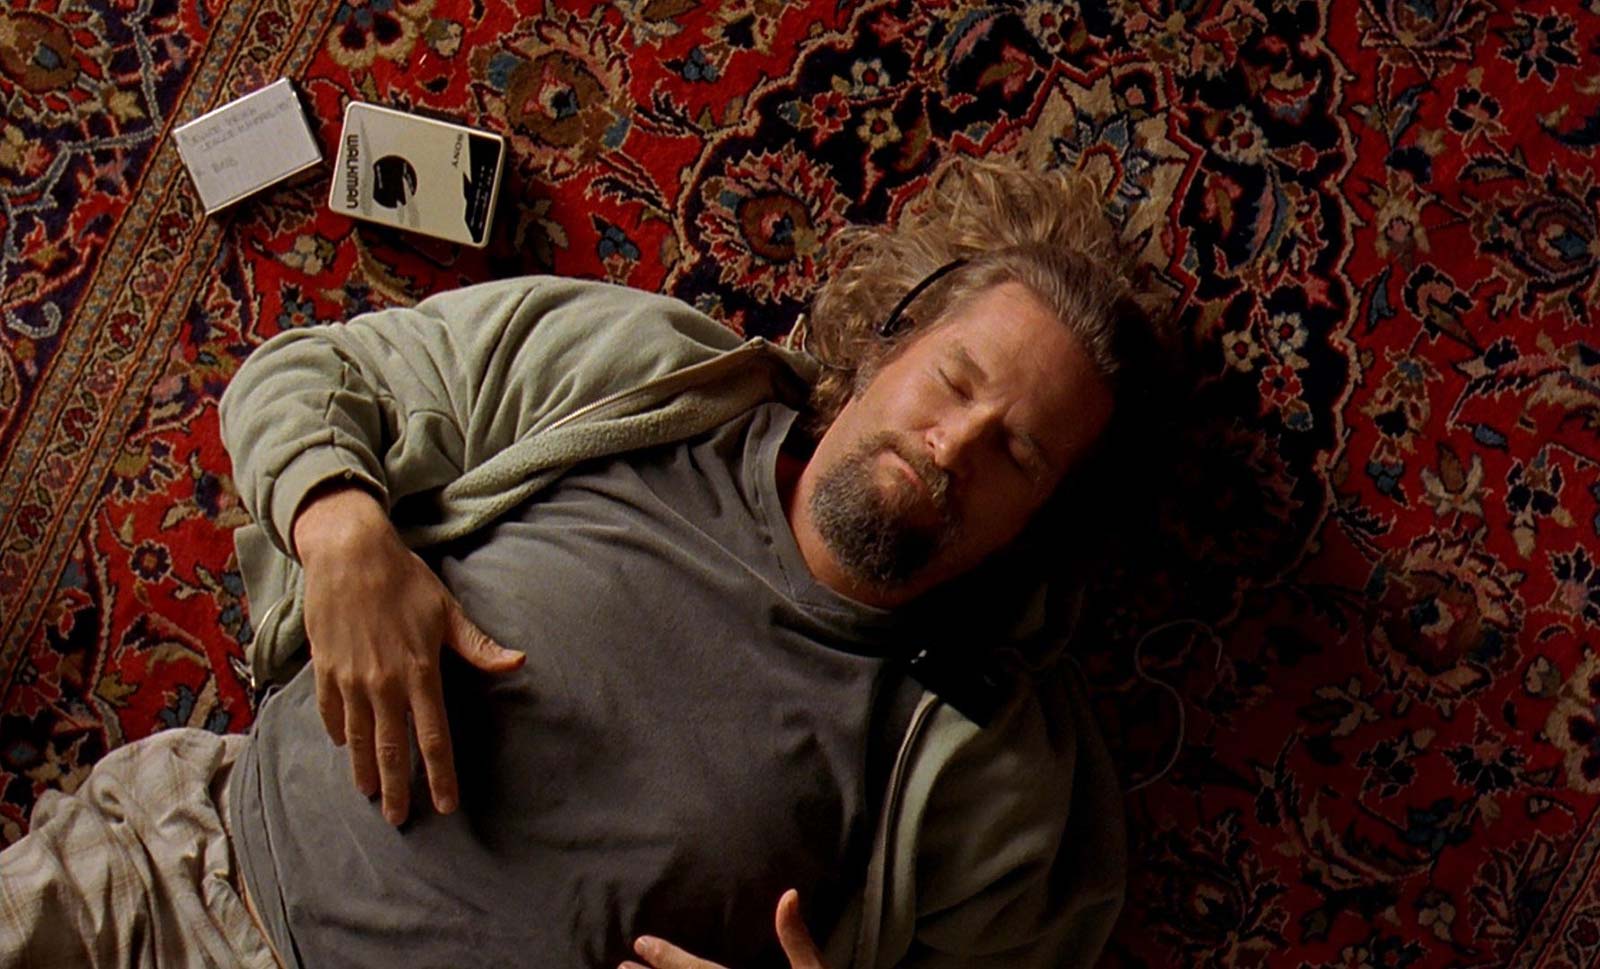 If You Have Enough Movie Knowledge, You Shouldn’t Break a Sweat Passing This Film Quiz The Big Lebowski 1998